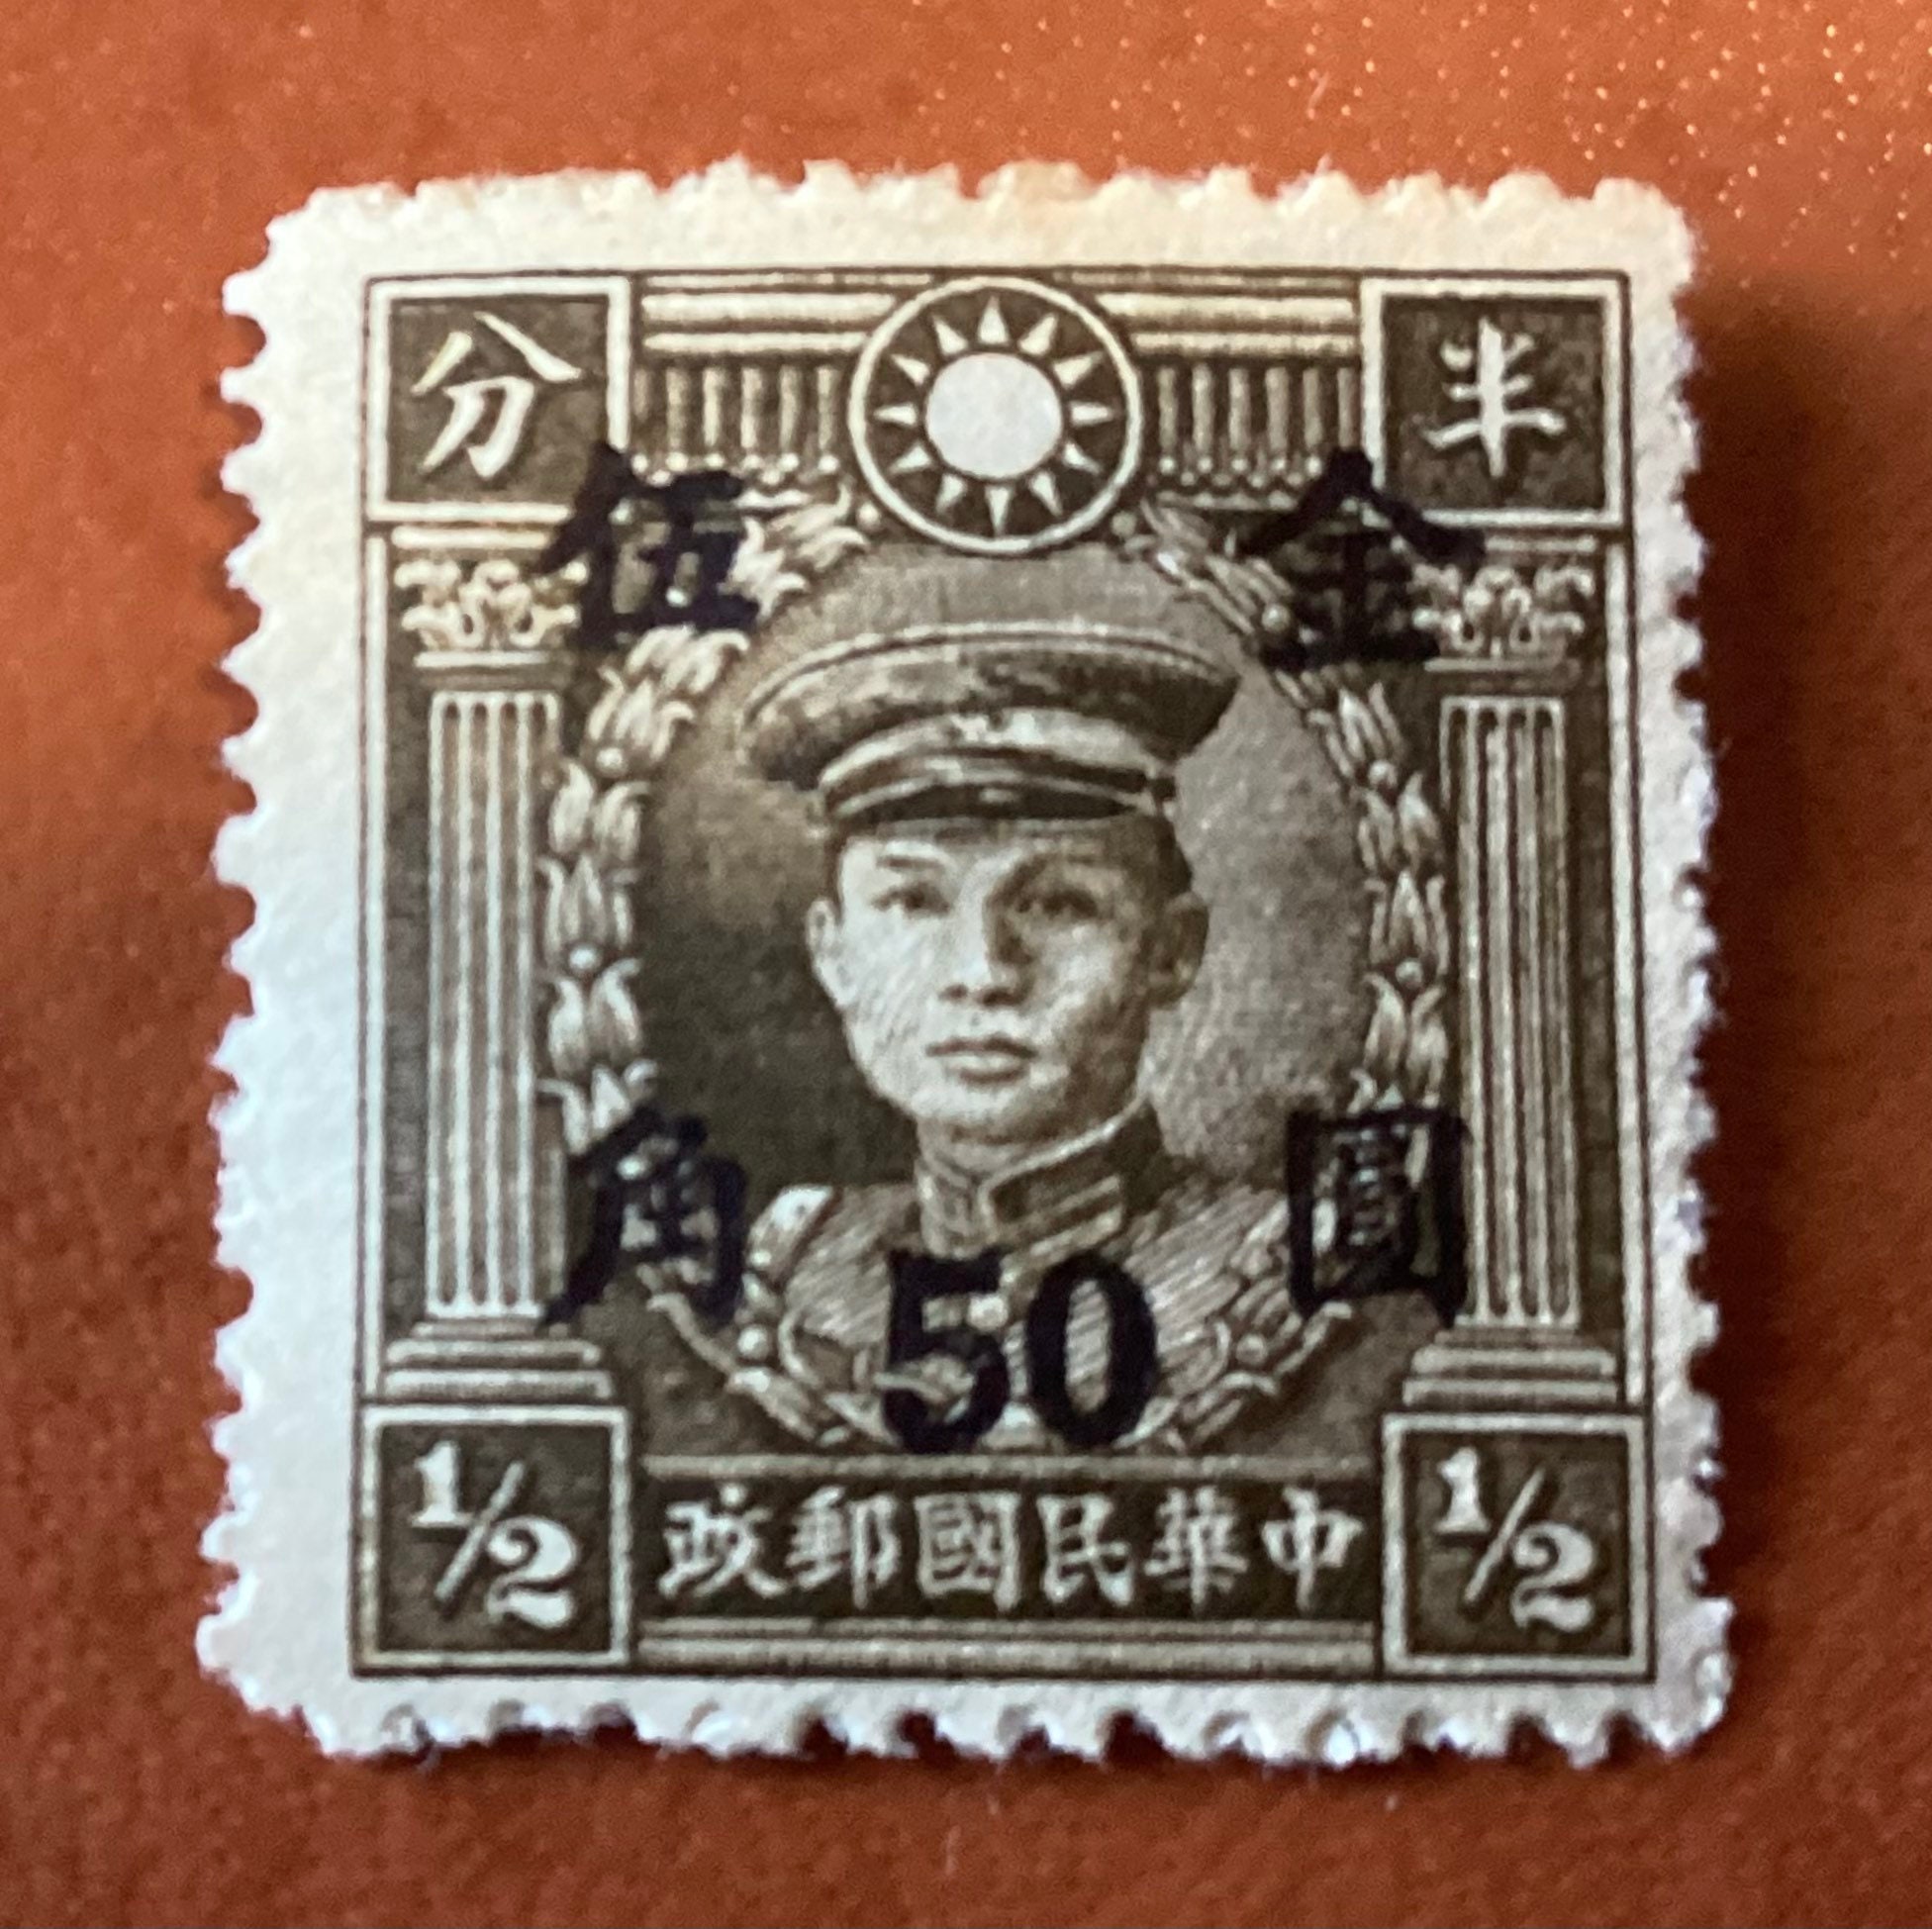 Rare Chinese Stamp, Martyrs Series, 1946, Overprint, 50 C. Lot #601